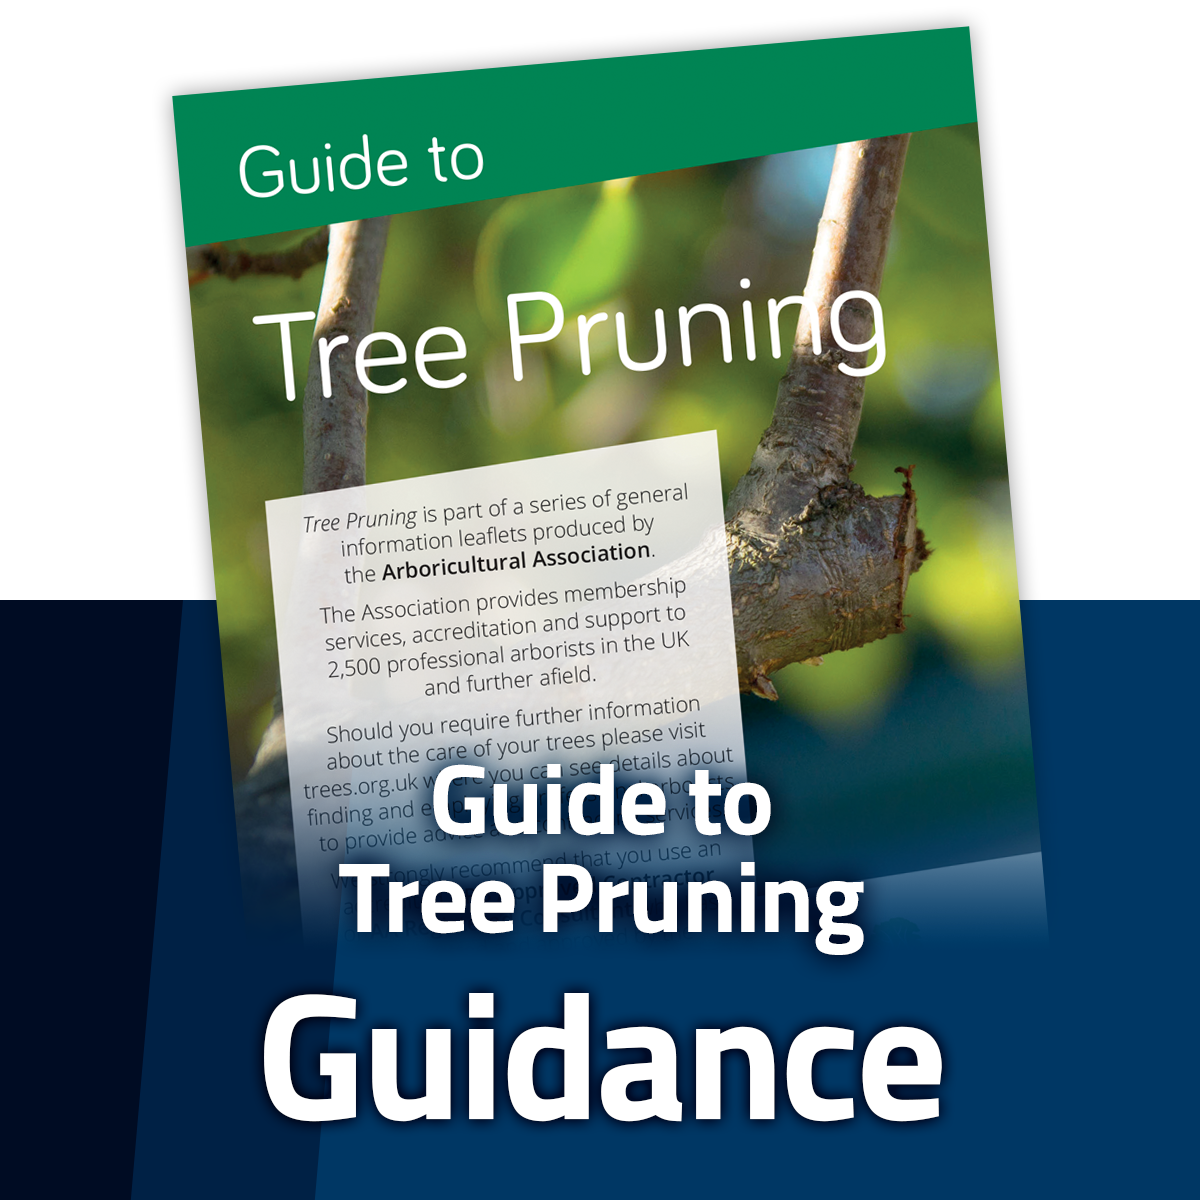 Guide to Tree Pruning